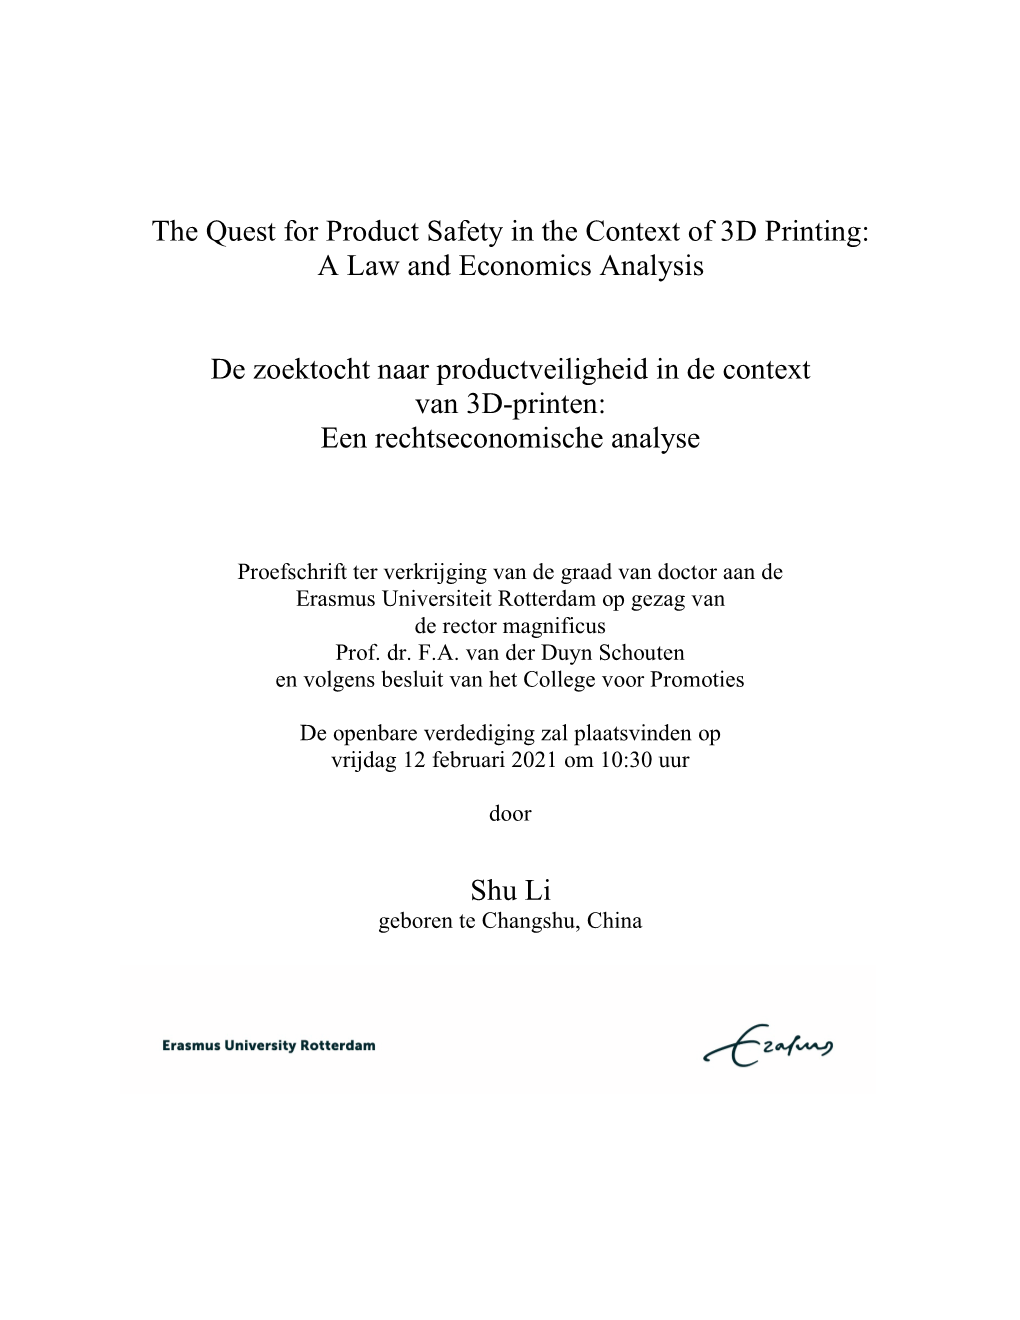 The Quest for Product Safety in the Context of 3D Printing: a Law and Economics Analysis